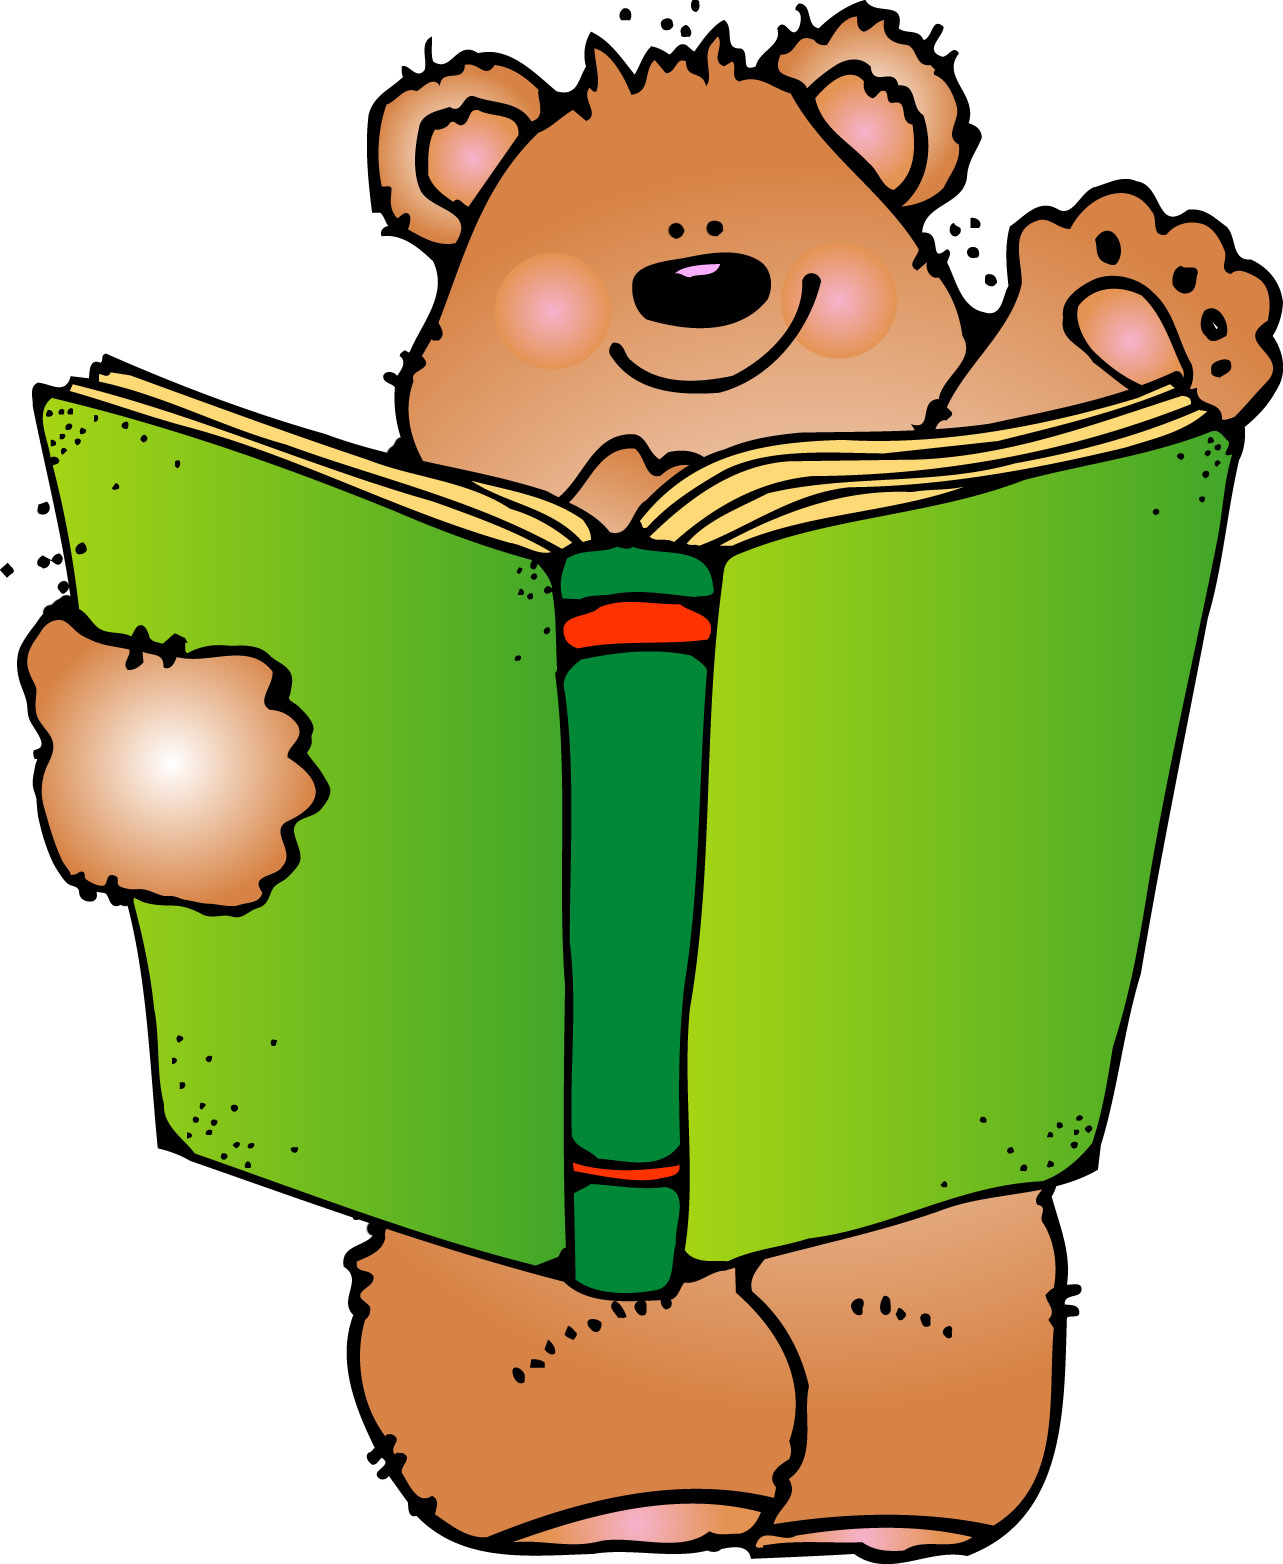 Inkers bear clipart.